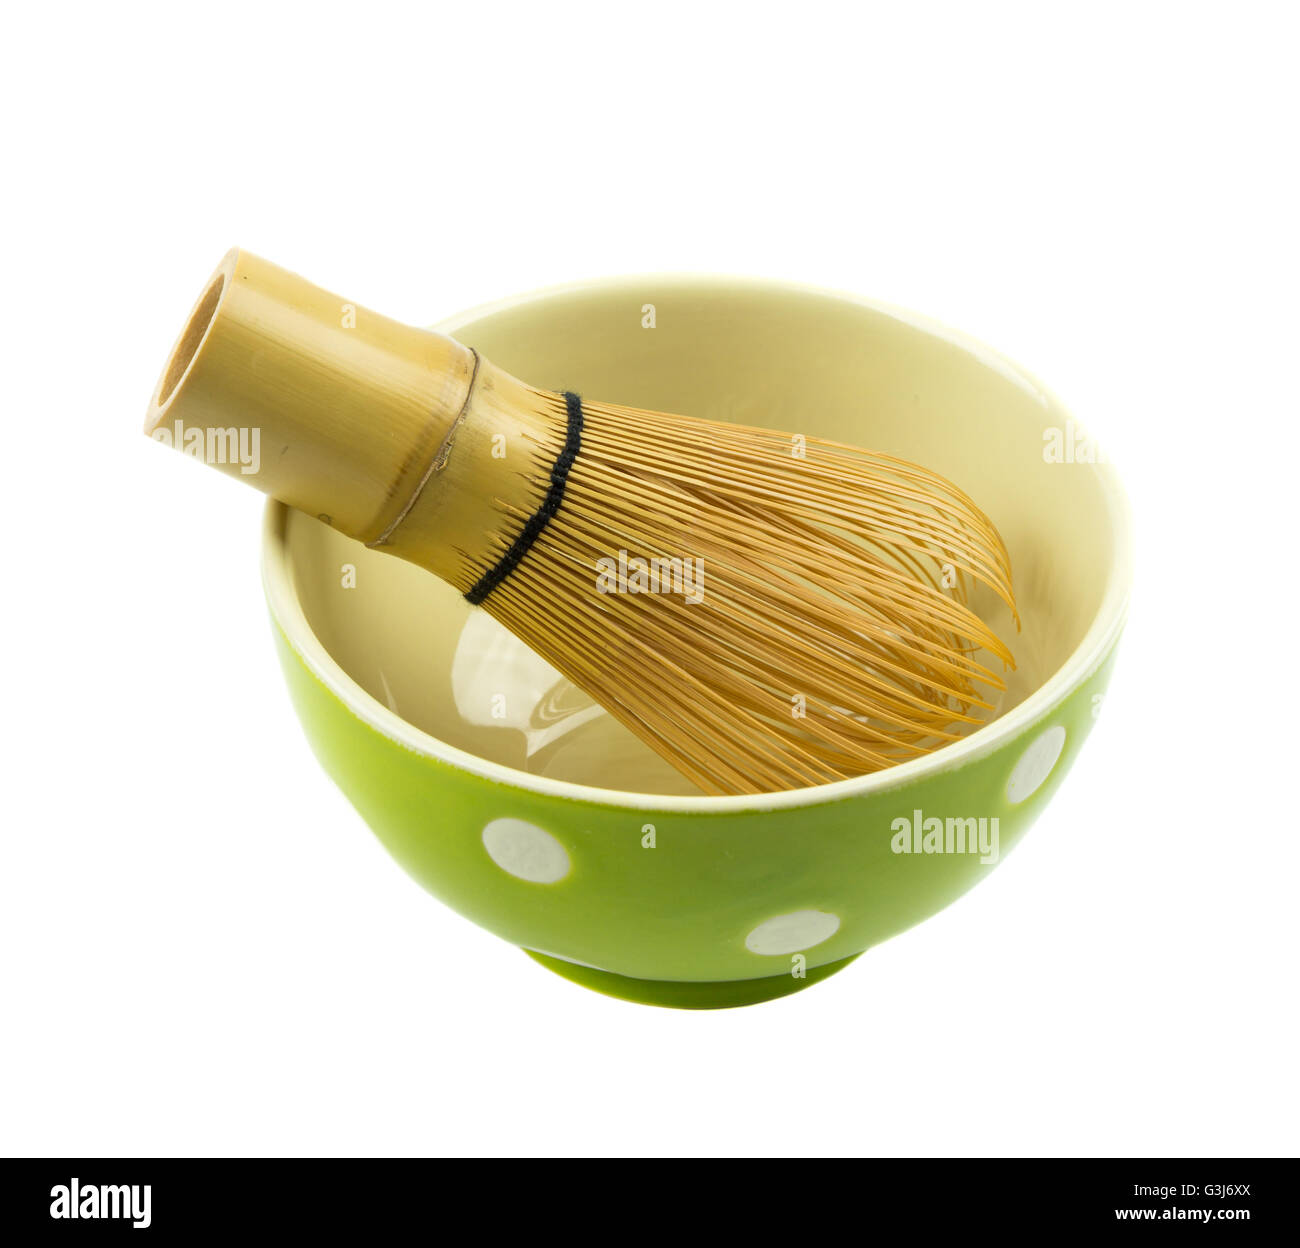 Bowl and tool for Japanese green tea preparation Stock Photo